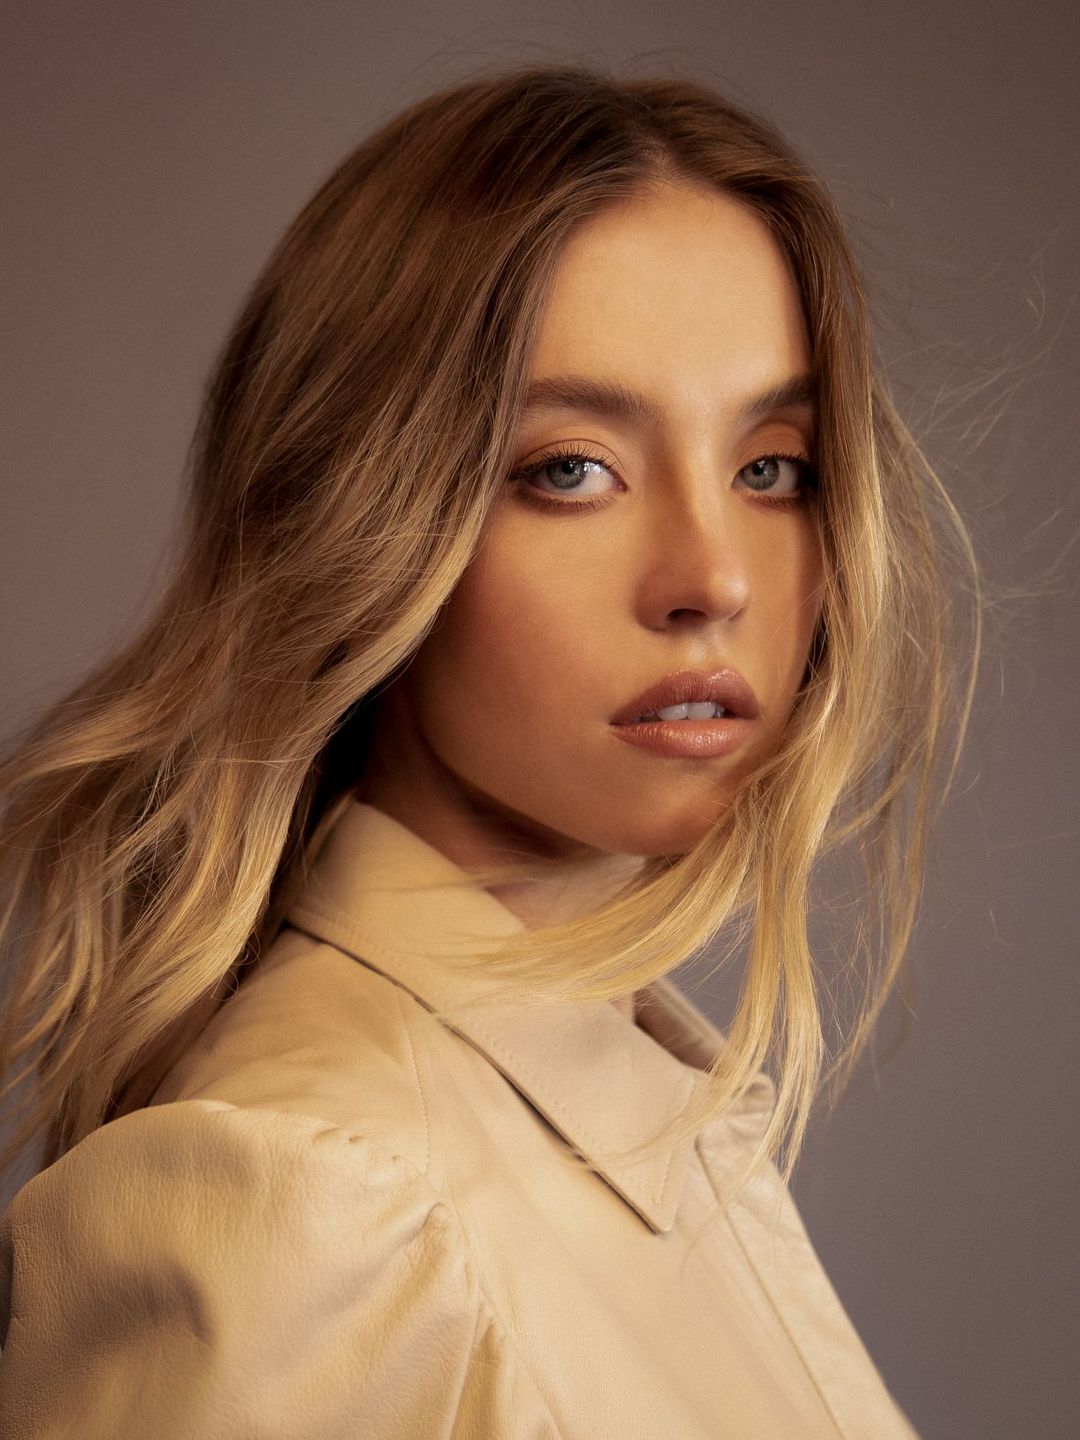 Sydney Sweeney who is her mother